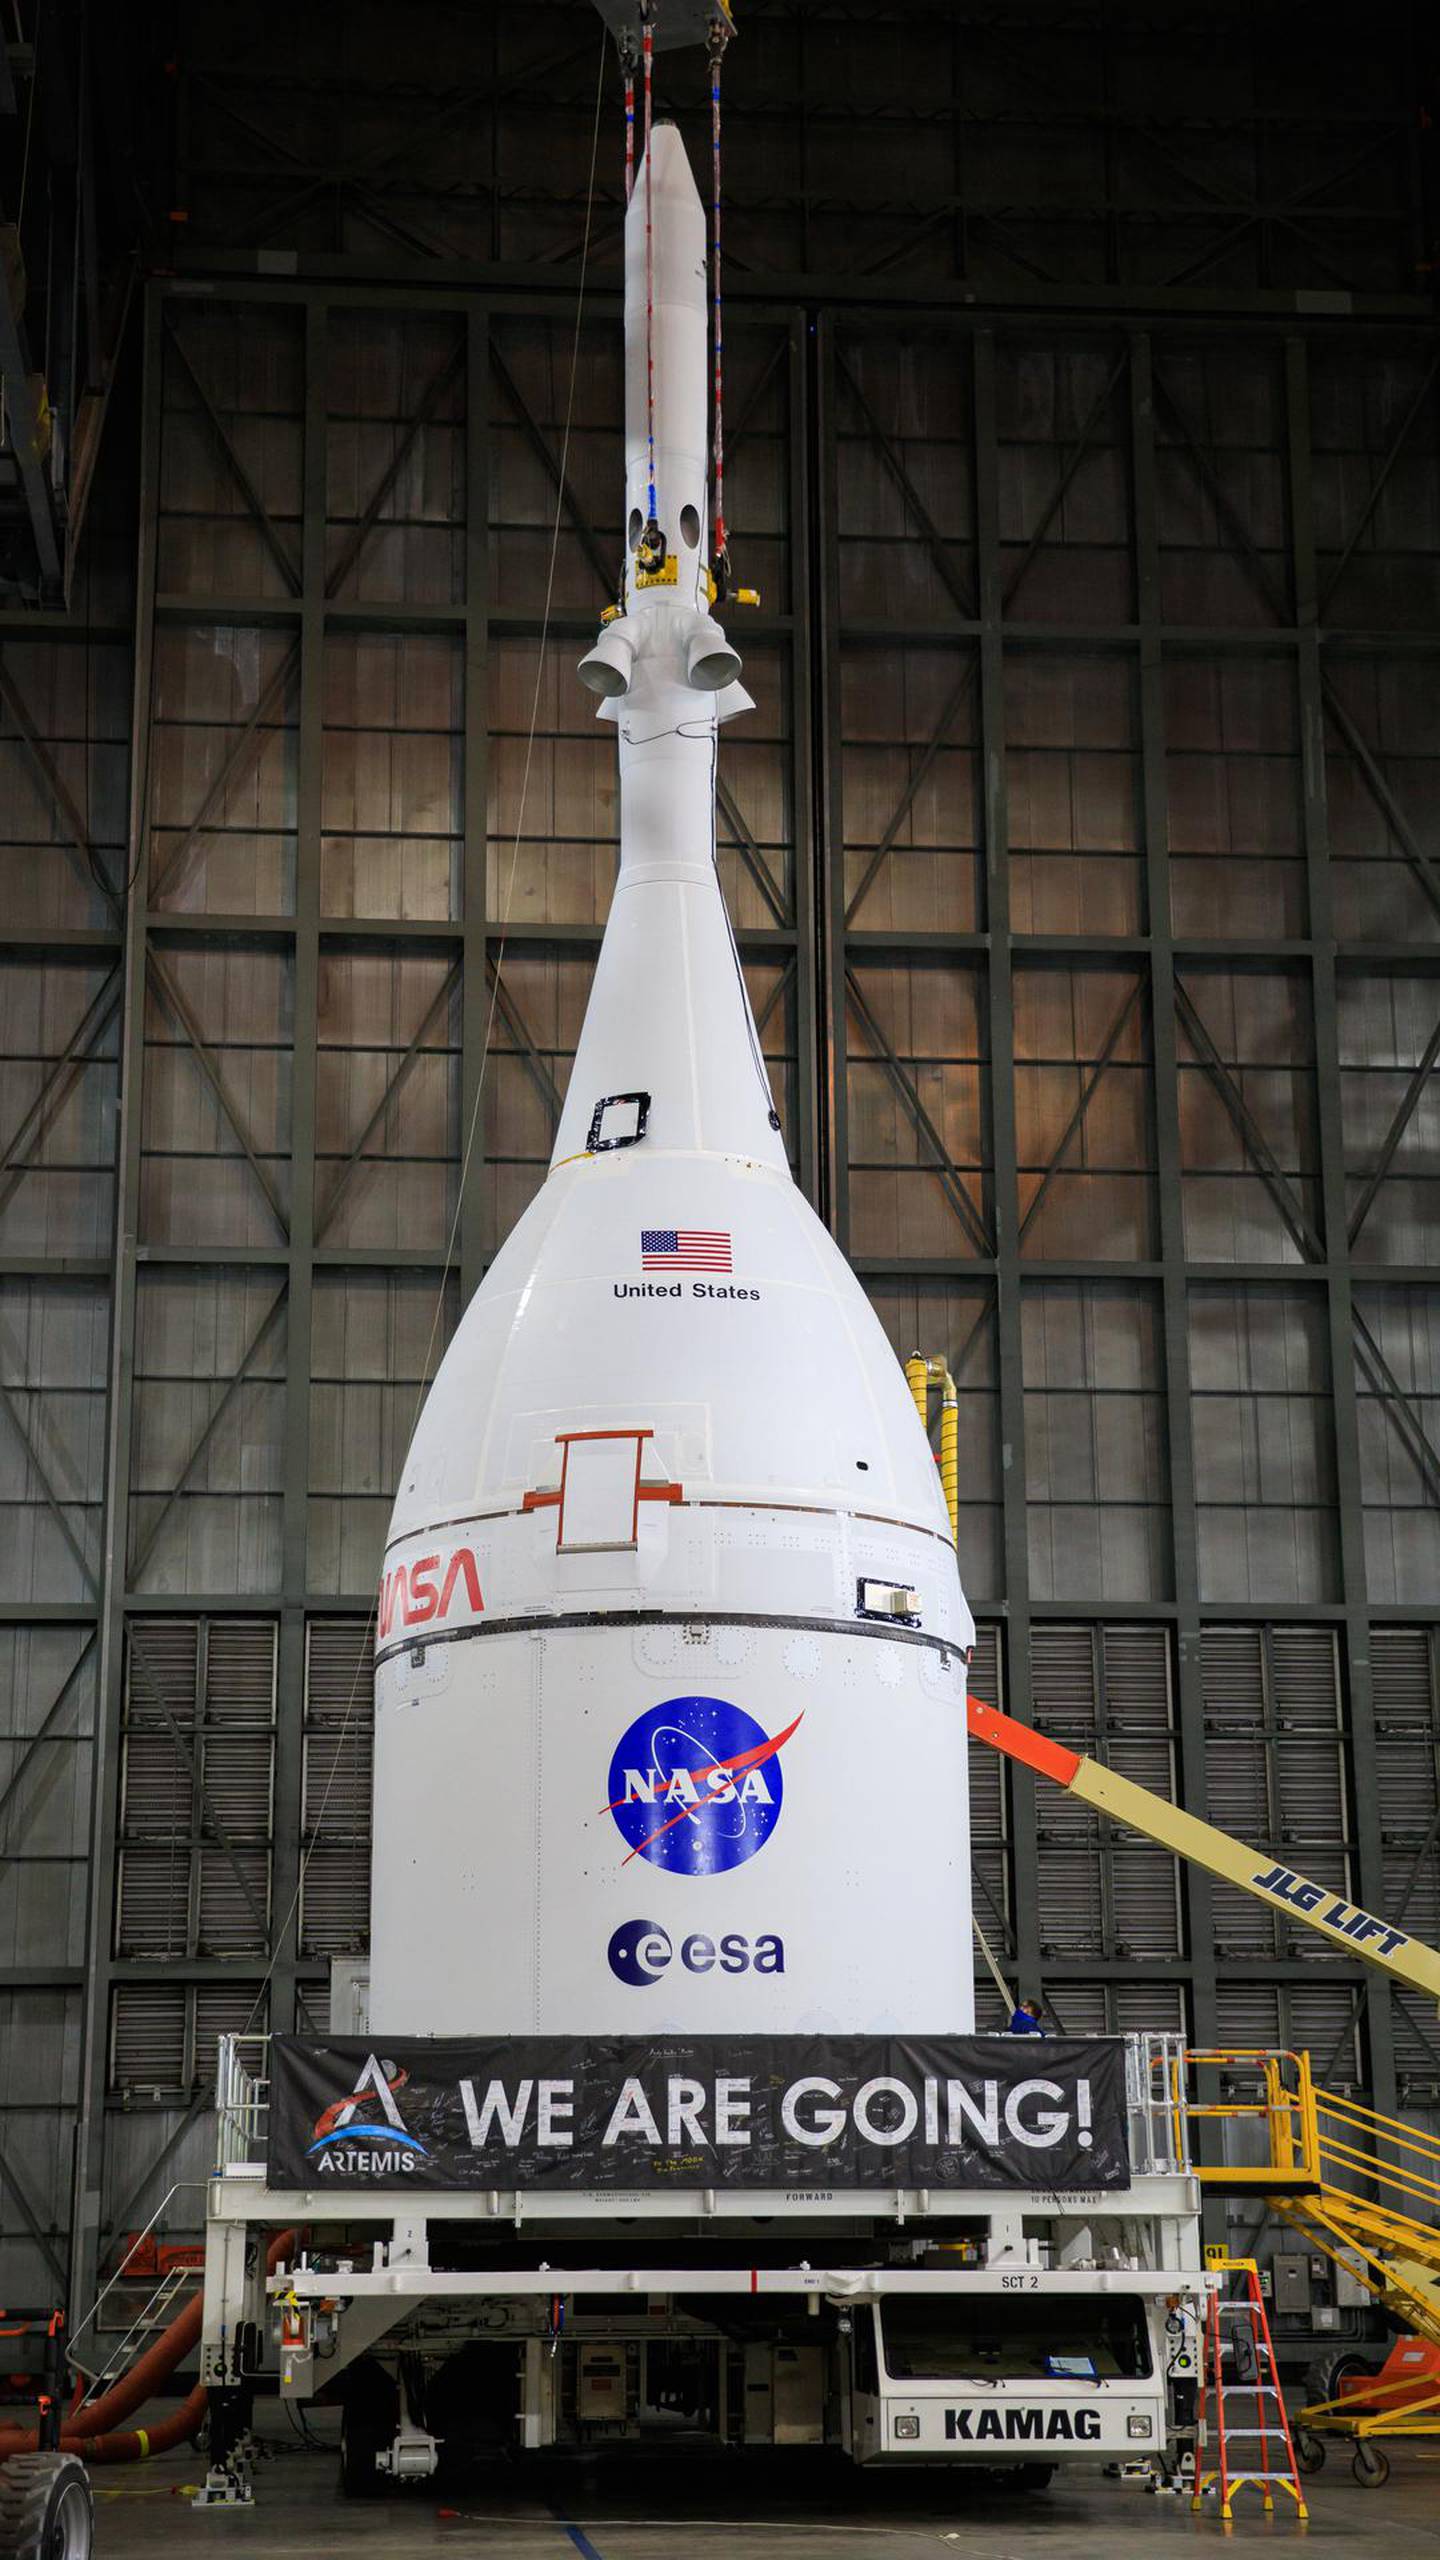 The Orion spacecraft will be placed on top of the rocket and will carry astronauts to the Moon. Photo: Nasa